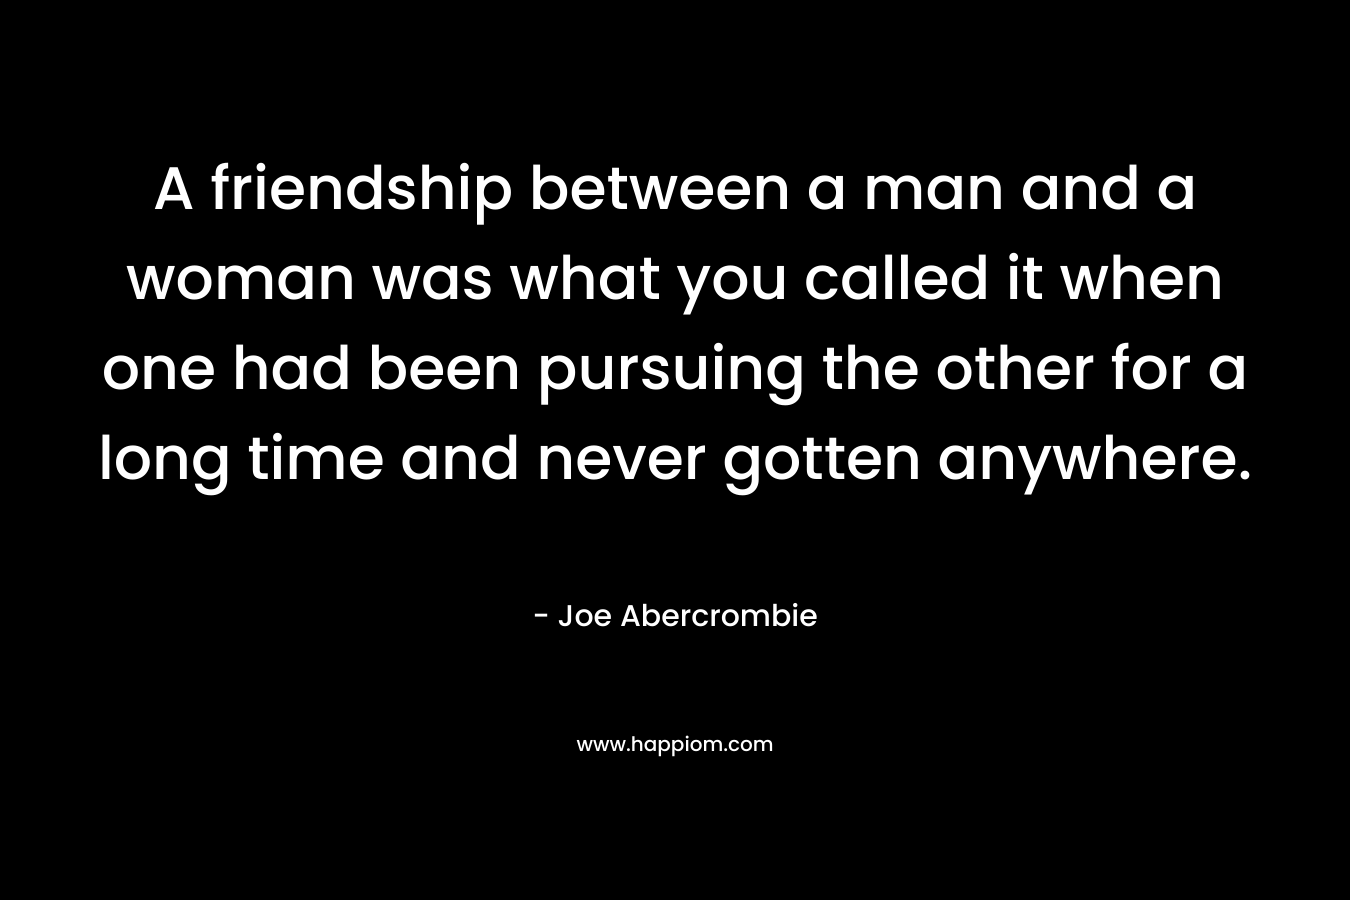 A friendship between a man and a woman was what you called it when one had been pursuing the other for a long time and never gotten anywhere.